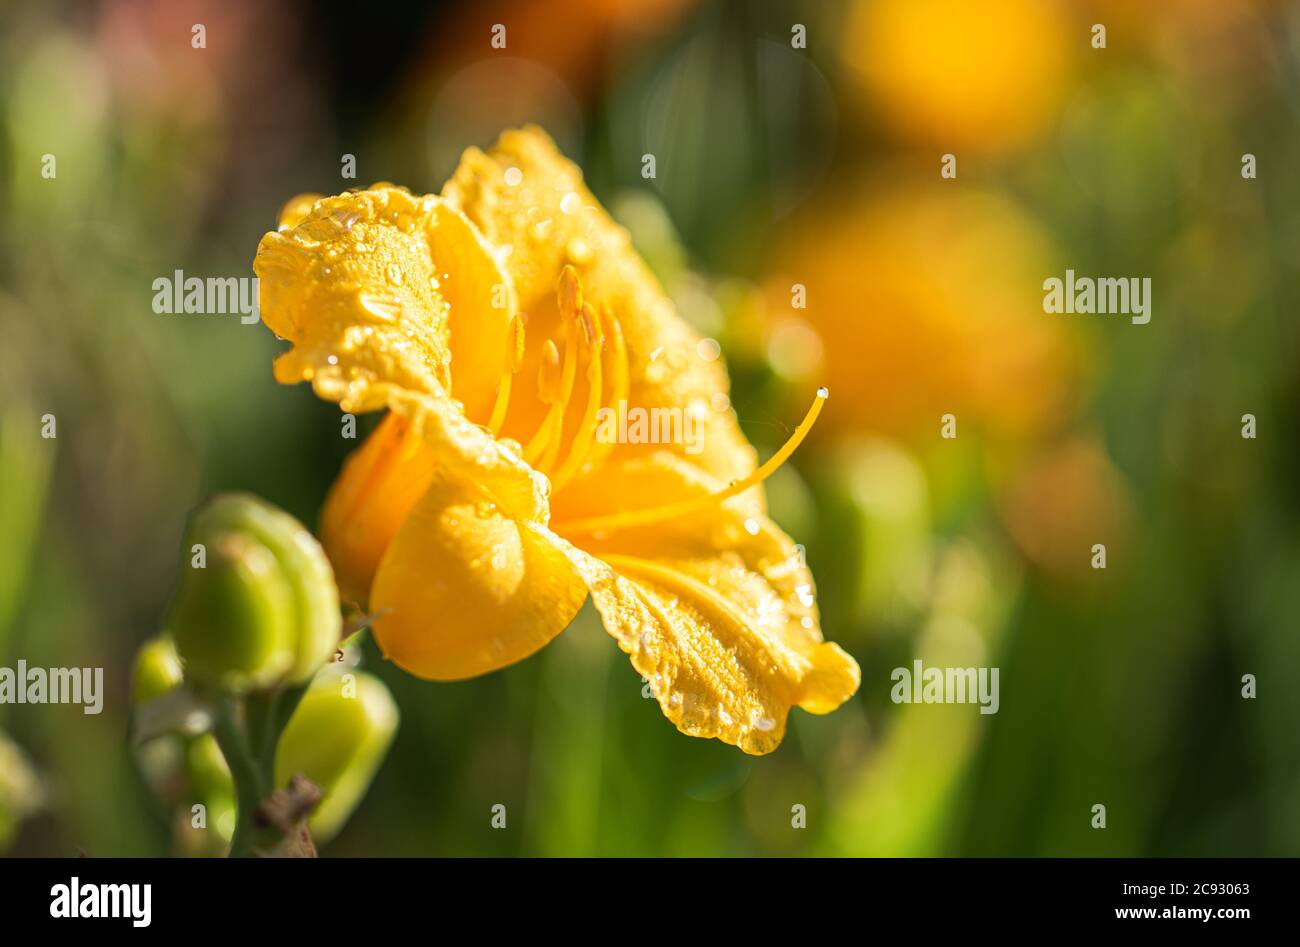 Close up of water drops on the petals of day lily flower in bloom. Stock Photo